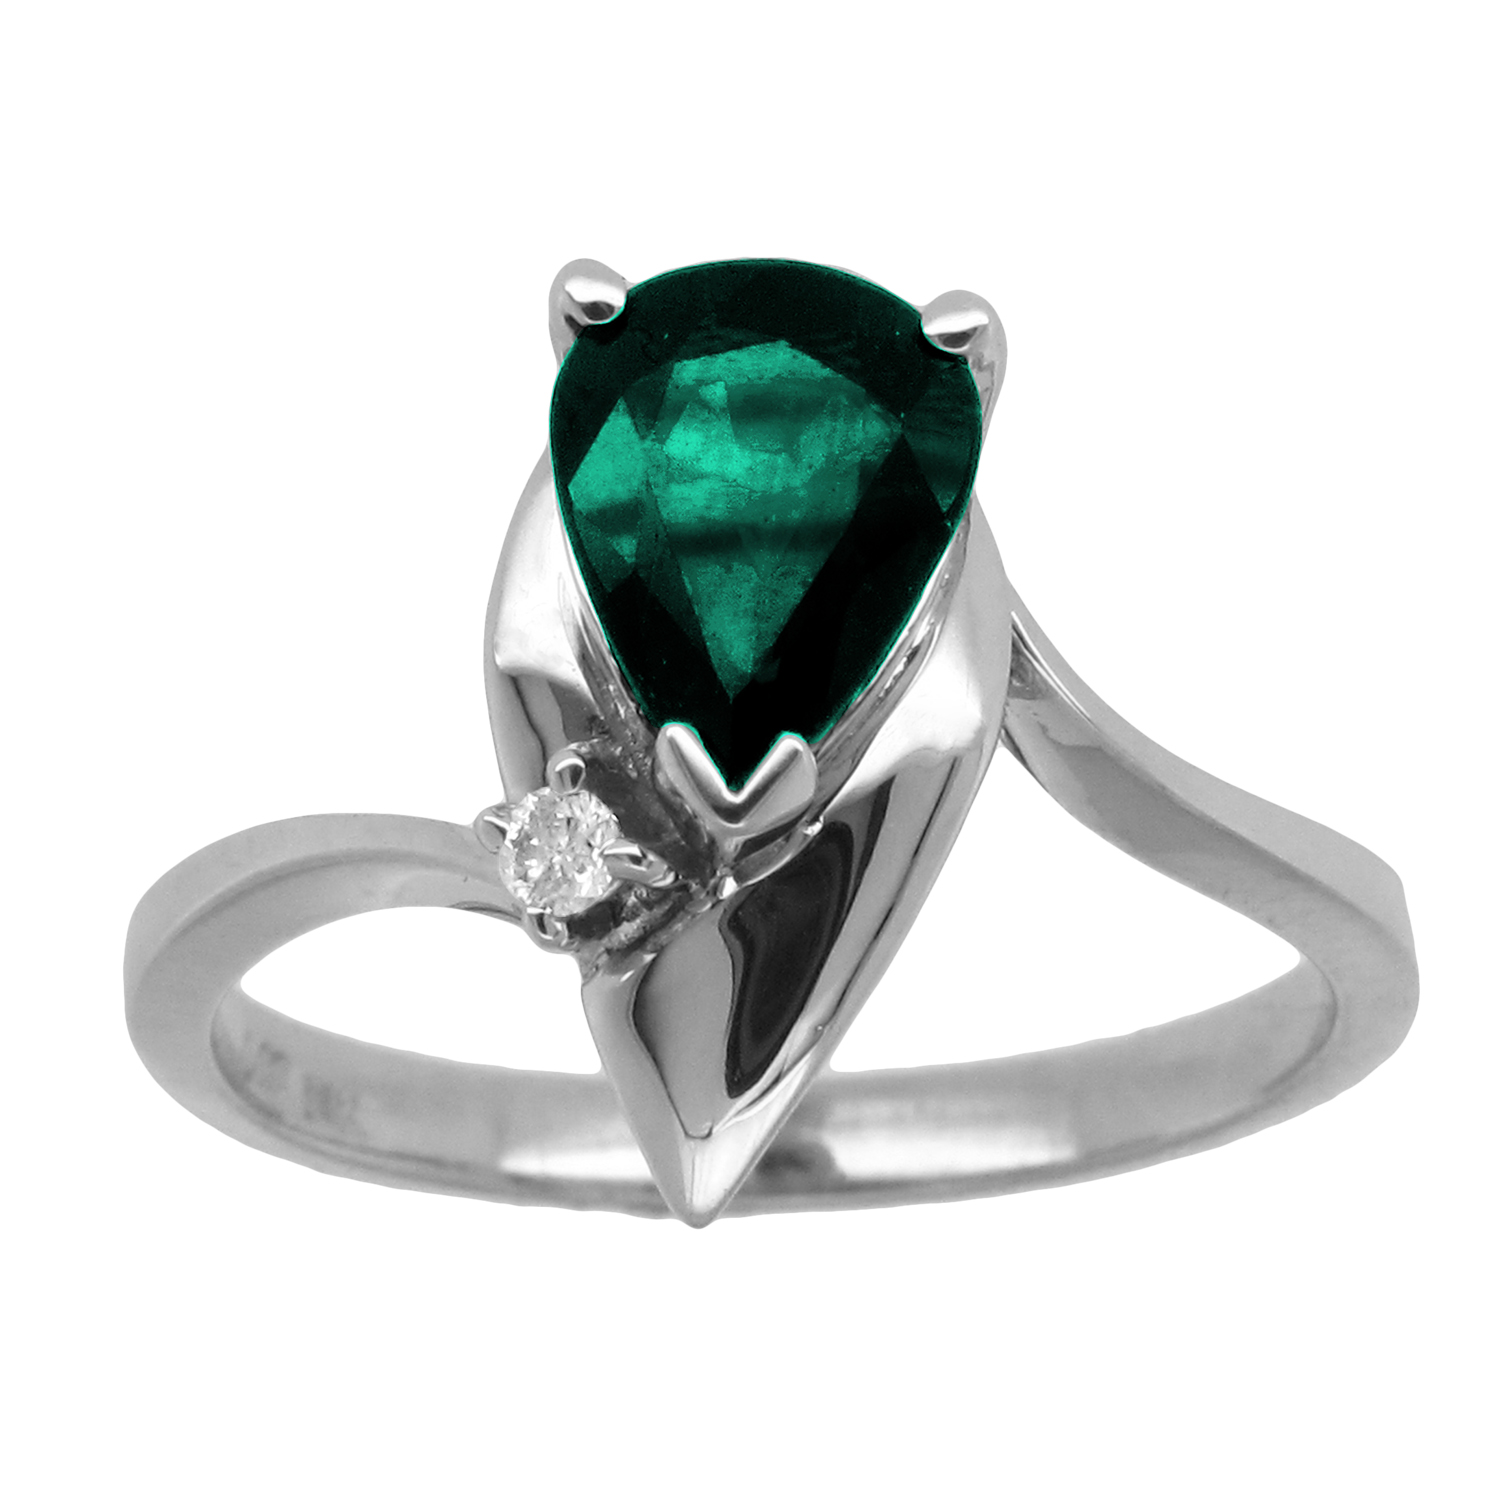 1.06cttw Pear Shaped Emerald and Diamond Fashion Ring set in 14k Gold